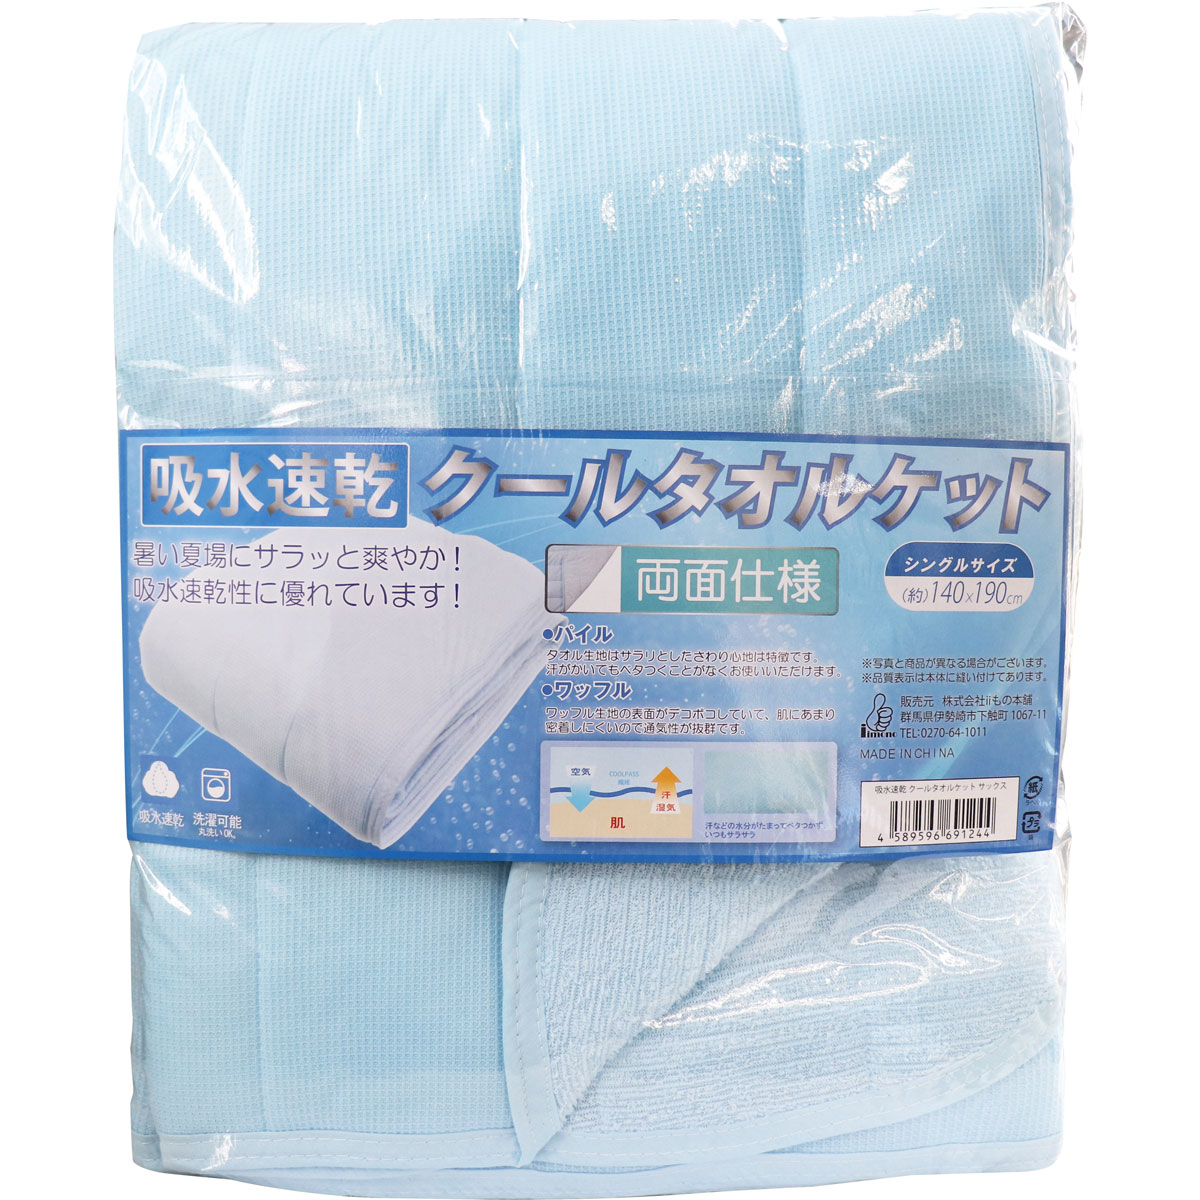 Picture of Saxe Blue color Quick Dry Cooling Cotton Blanket